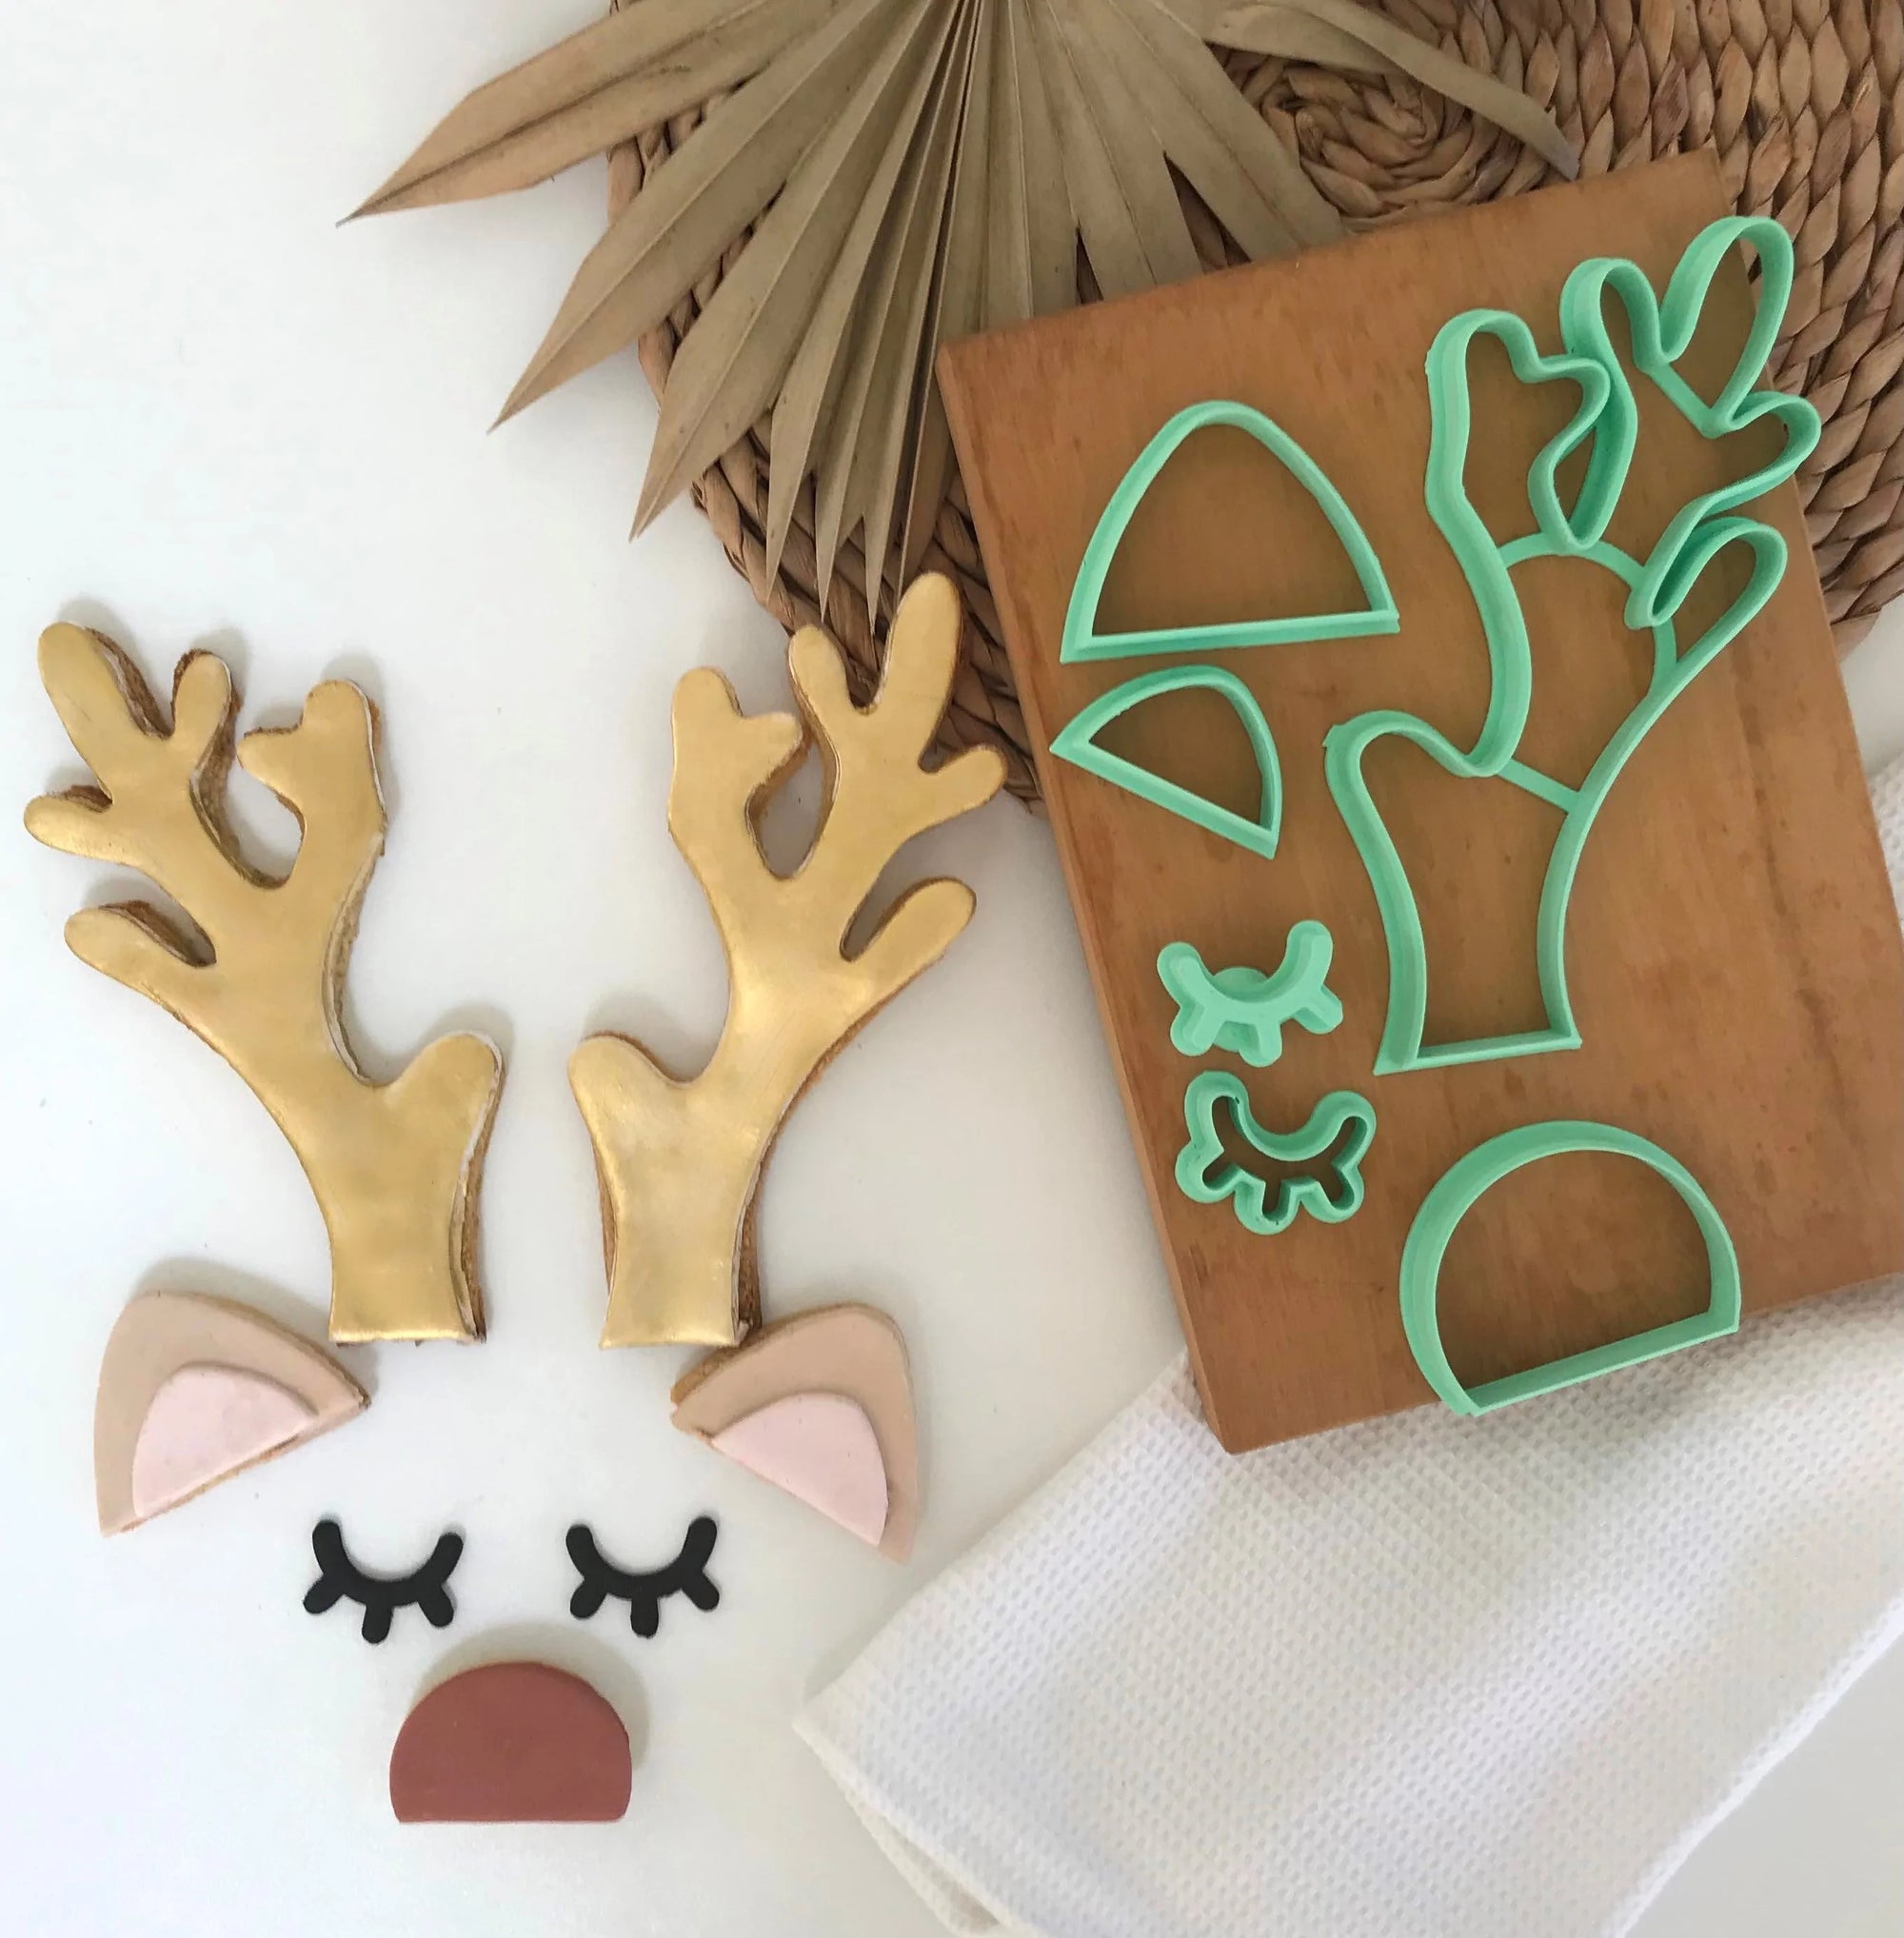 REINDEER FACE CAKE COOKIE CUTTER SET by Sweet P